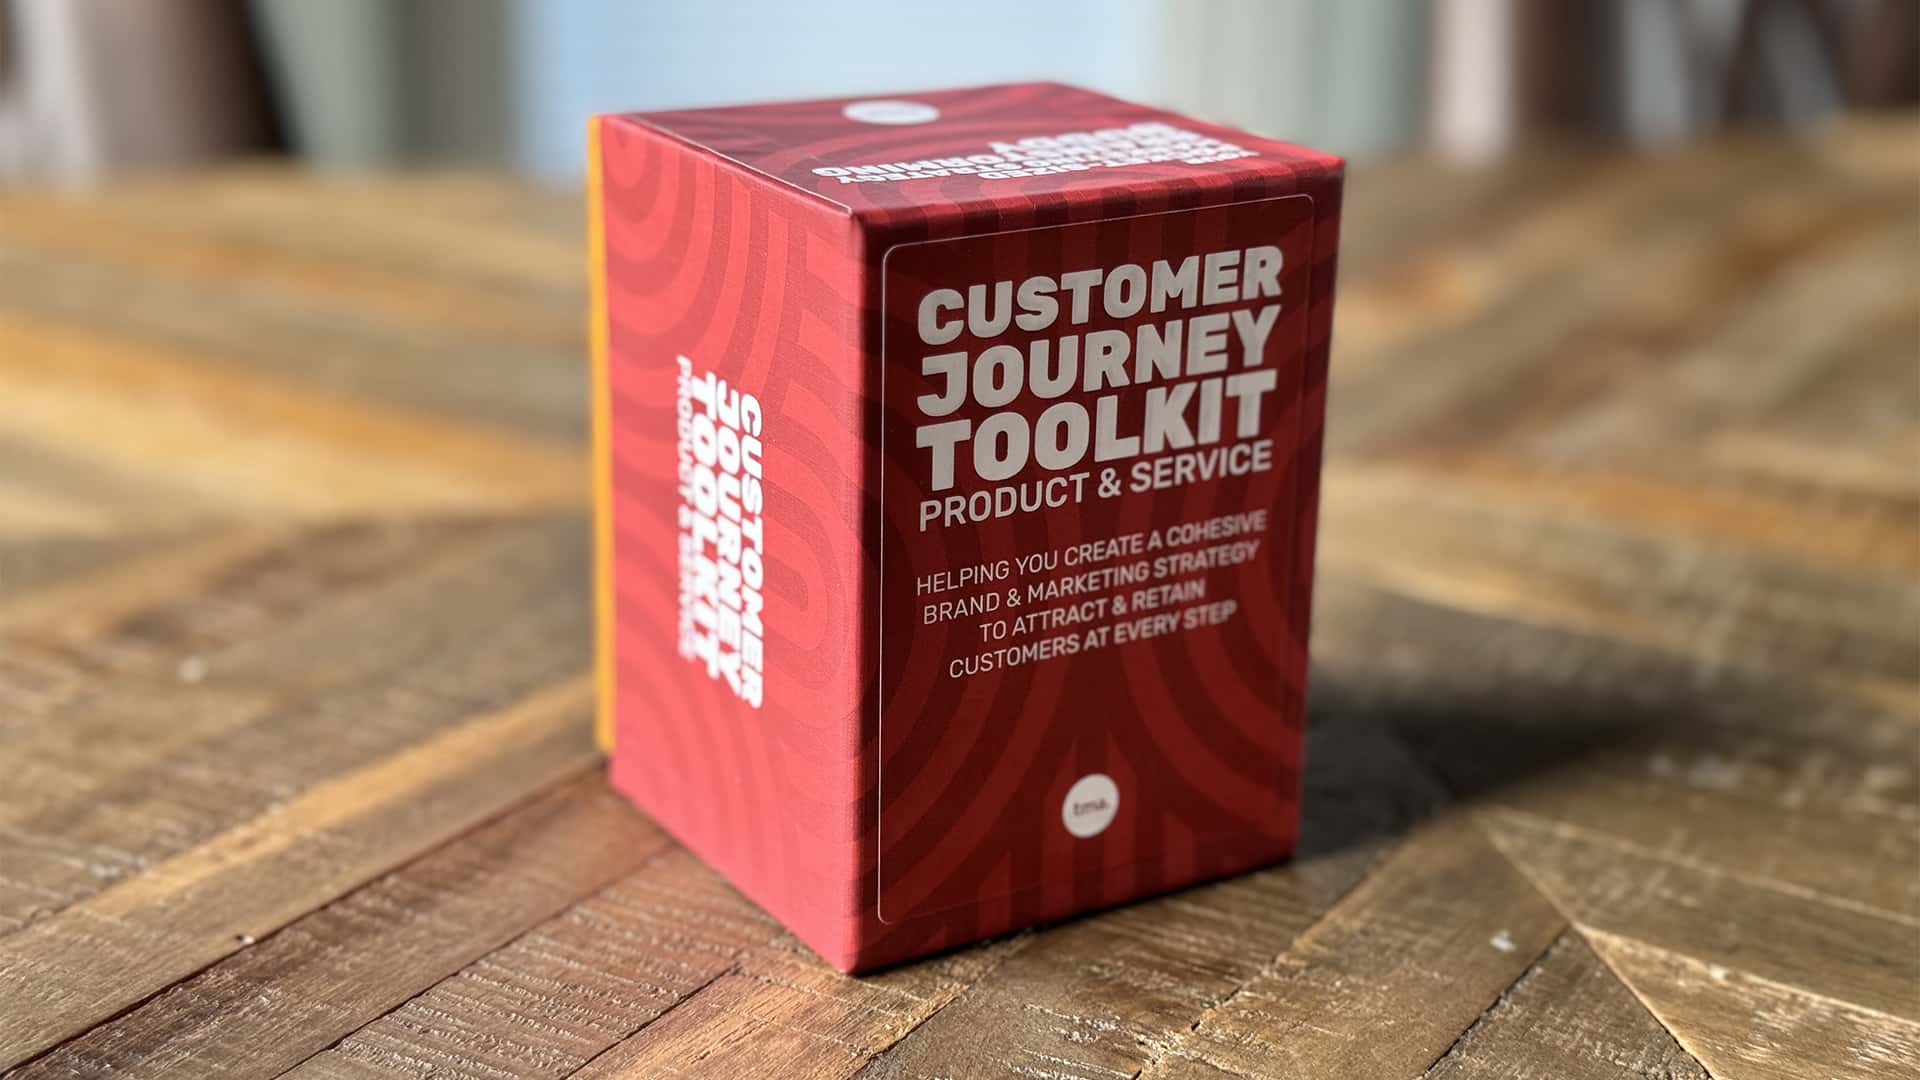 A red box labeled "Customer Journey Toolkit: Product & Service" sits on a wooden table, promoting a cohesive brand and marketing strategy to retain customers.